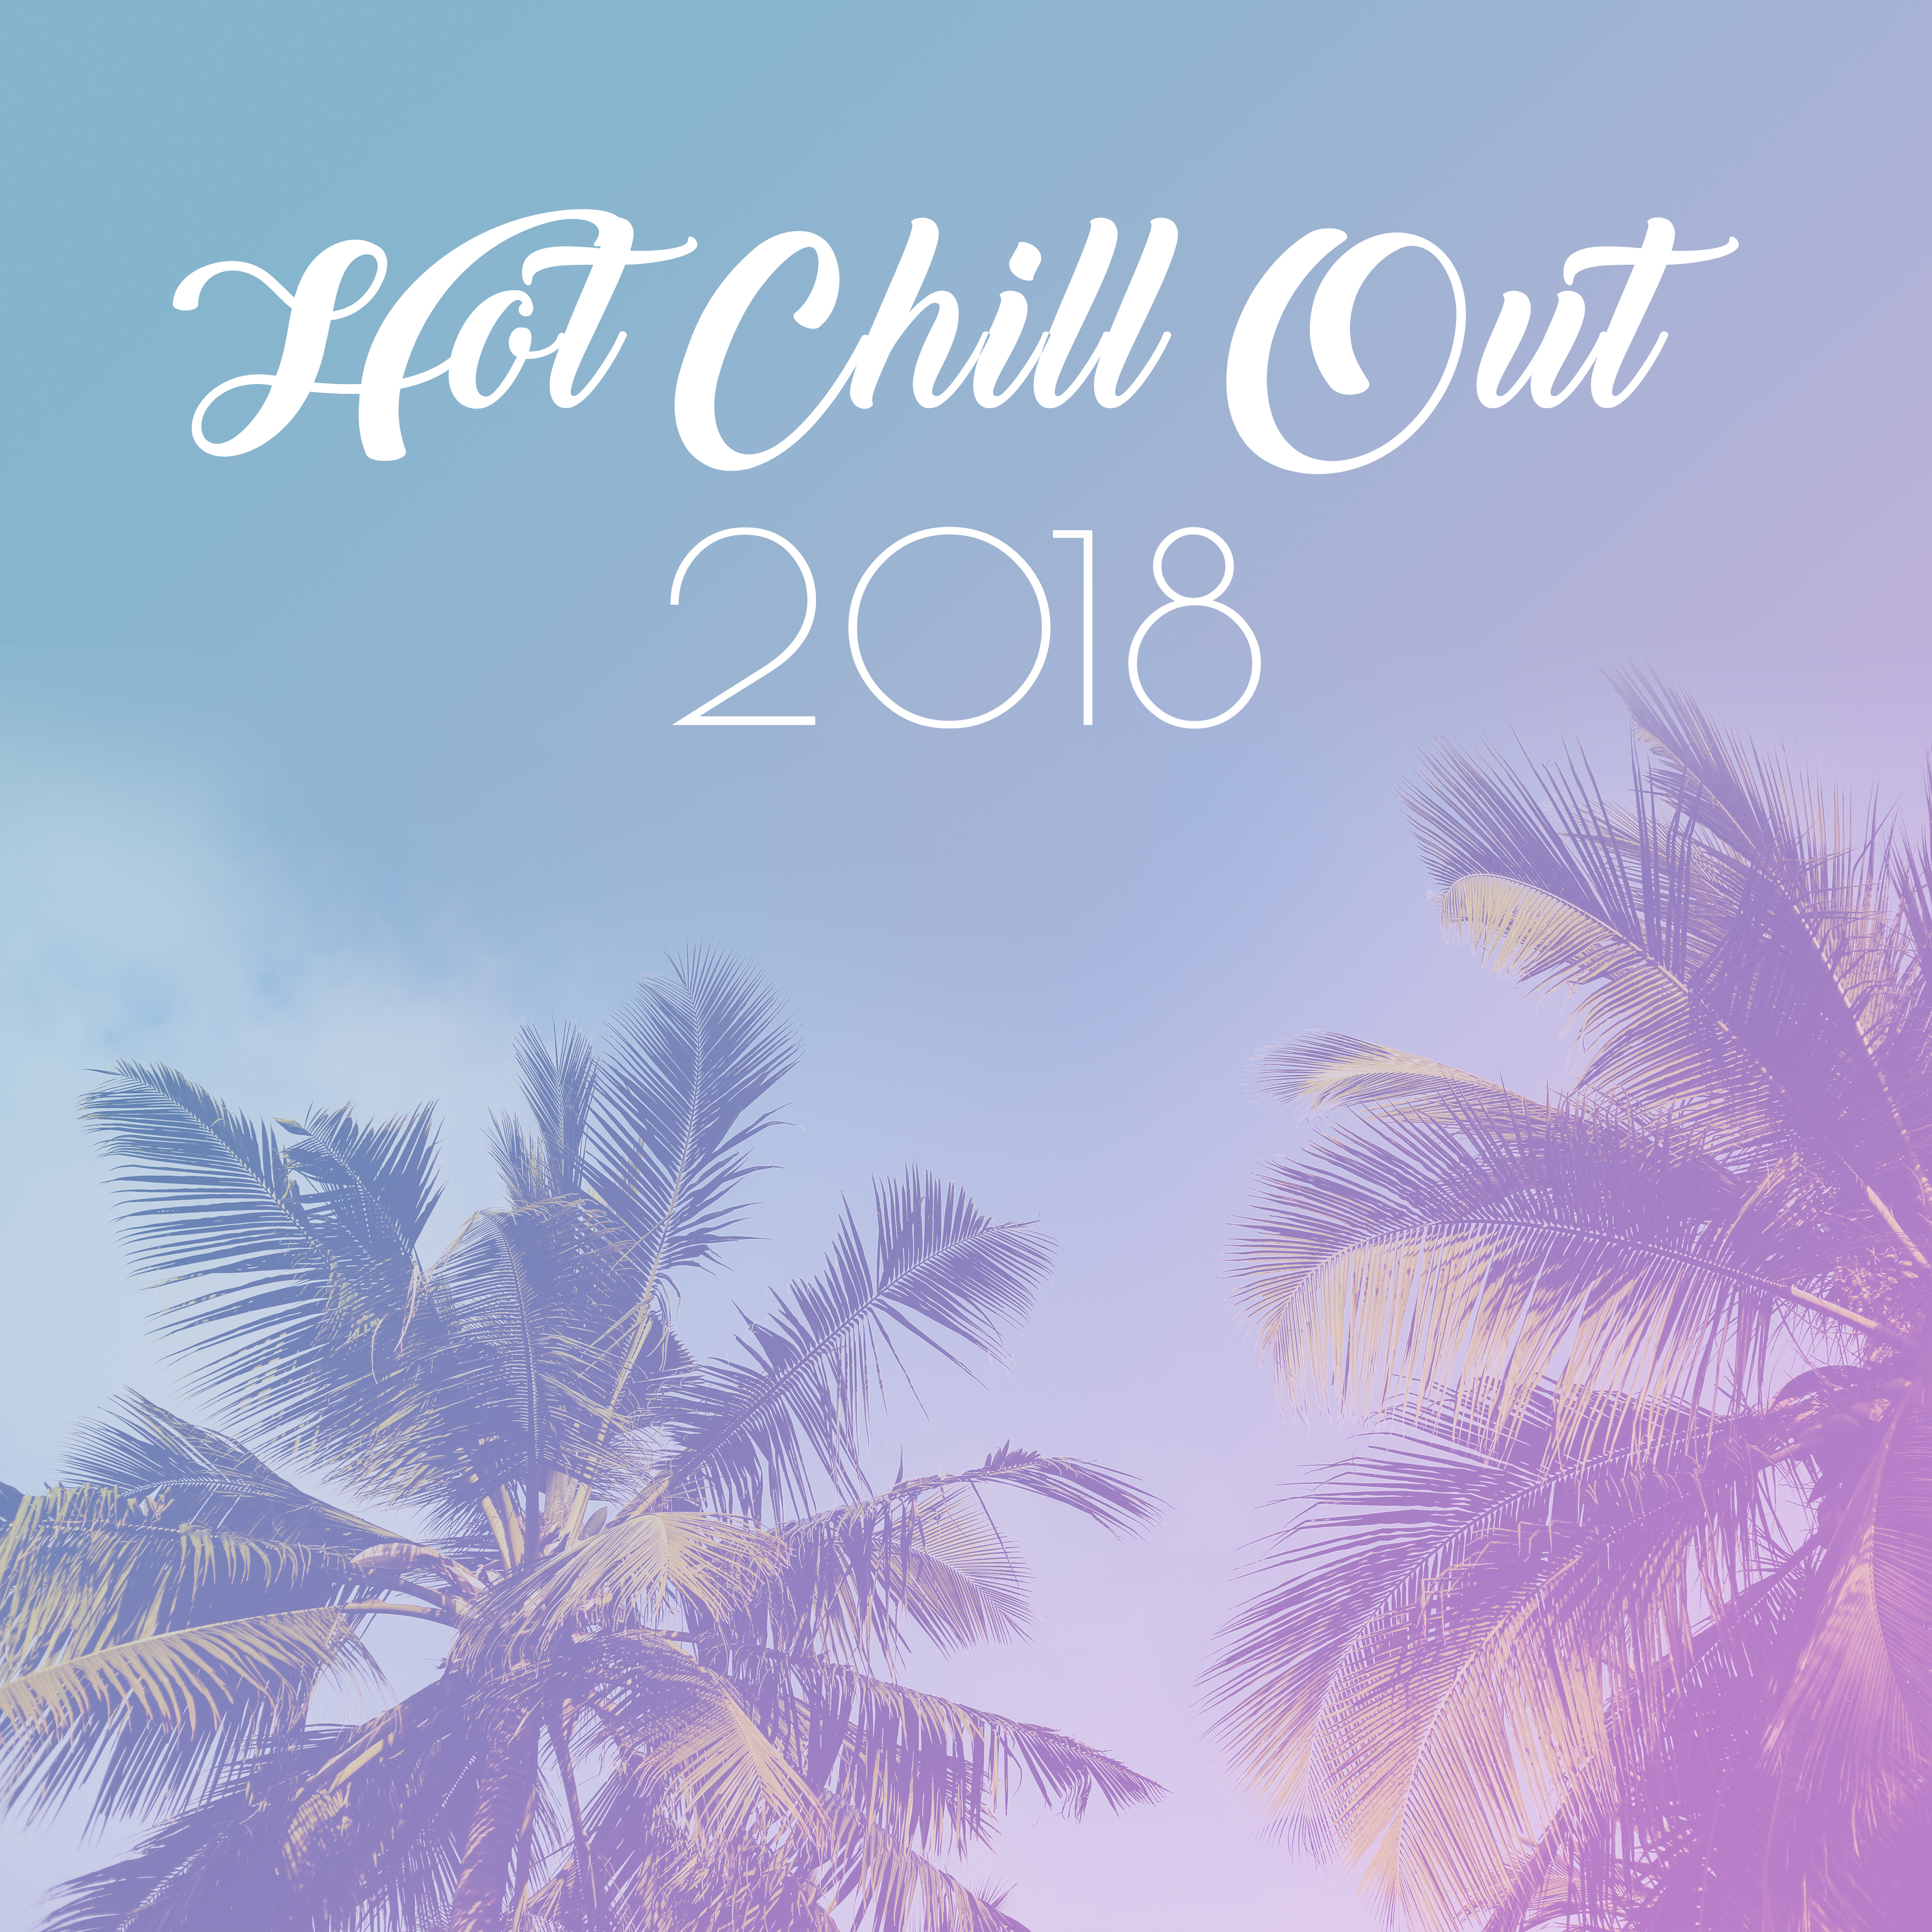 Hot Chill Out 2018